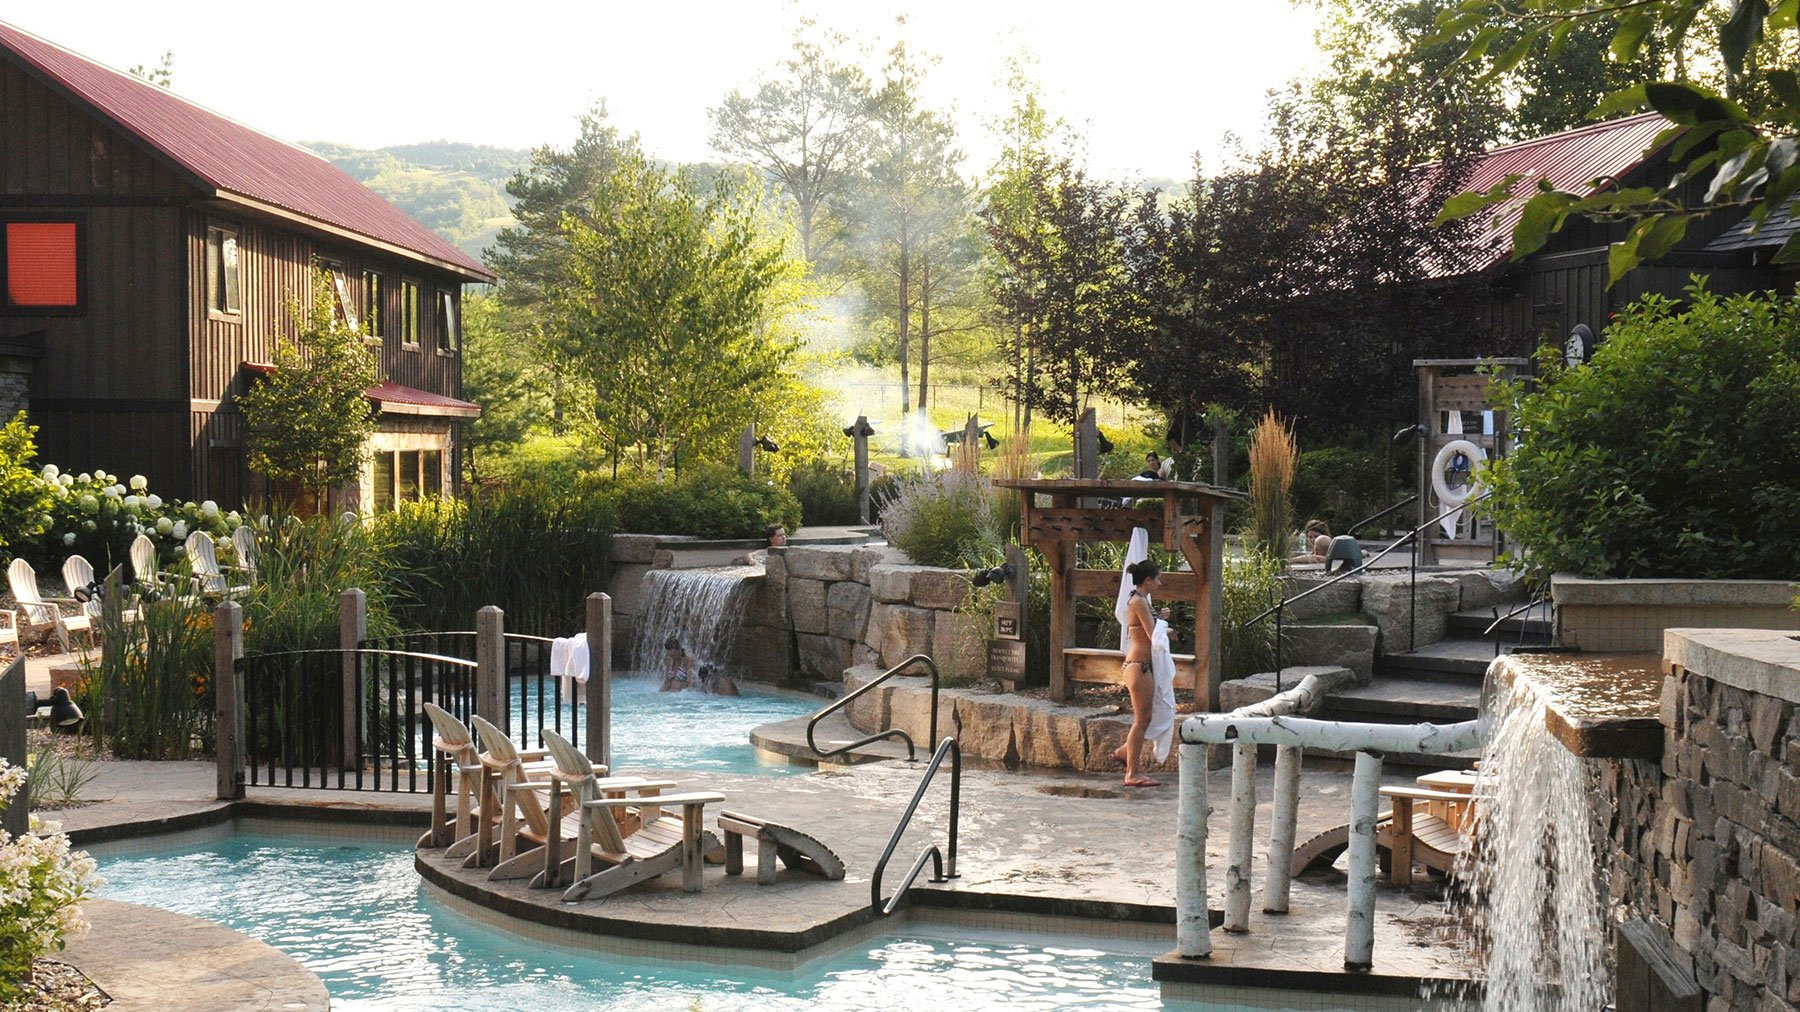 Image of the Scandinave Spa